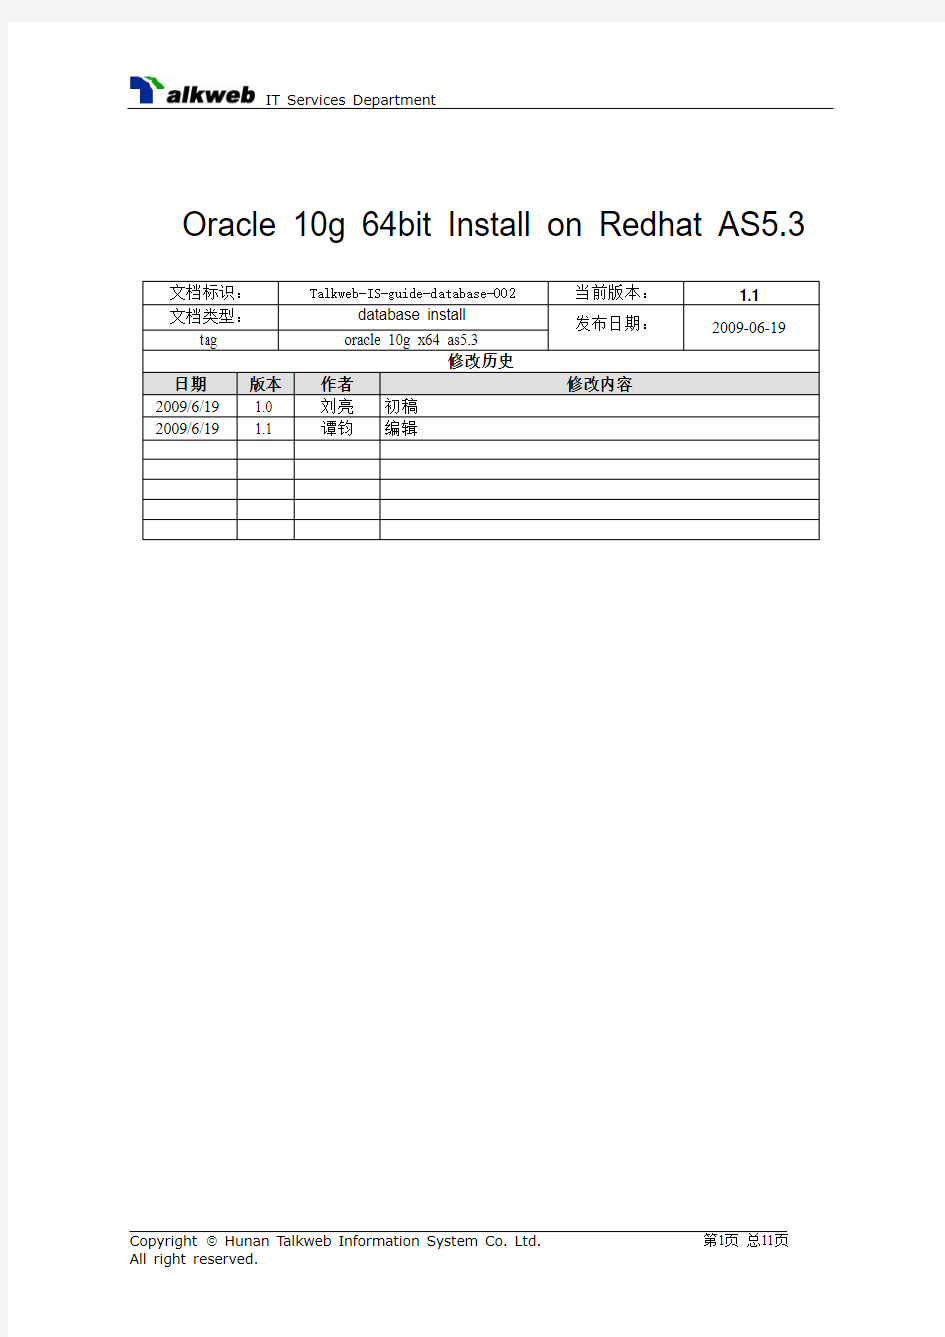 Database install_Oracle 10g 64bit Install on Redhat AS5.3 v1.1